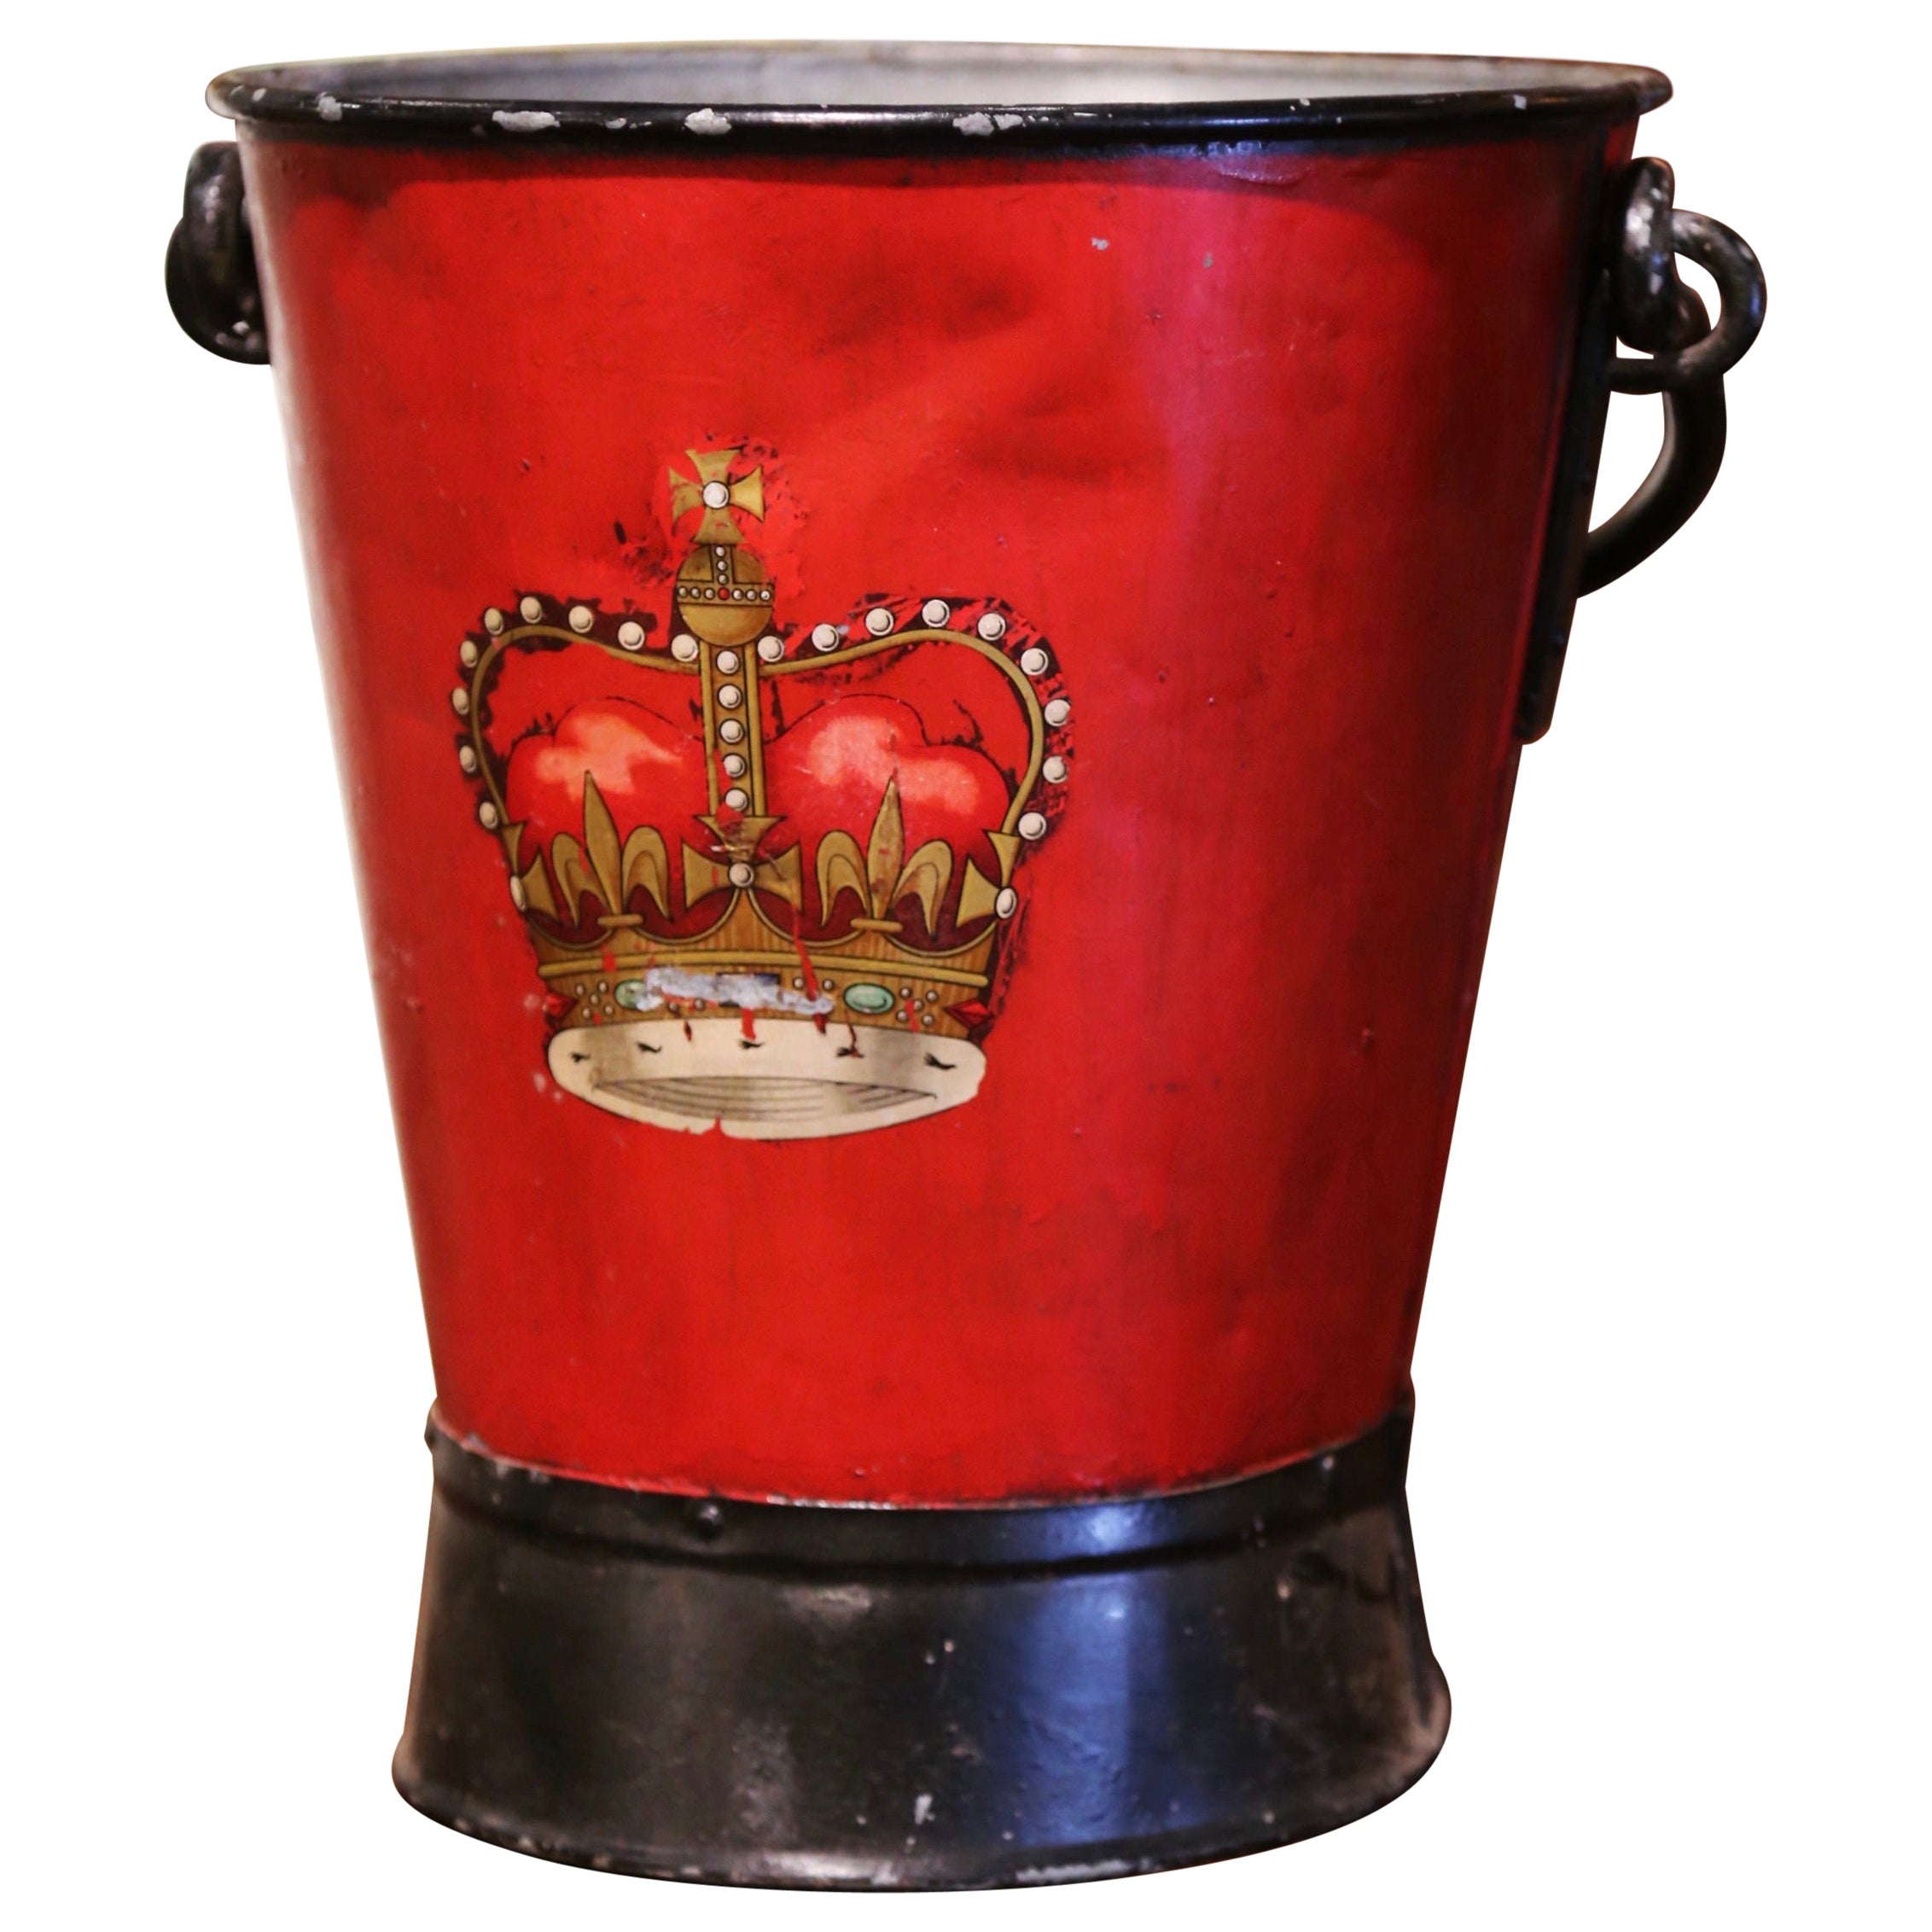 19th Century English Hand Painted Iron Coal Bucket with Coat of Arms Decor